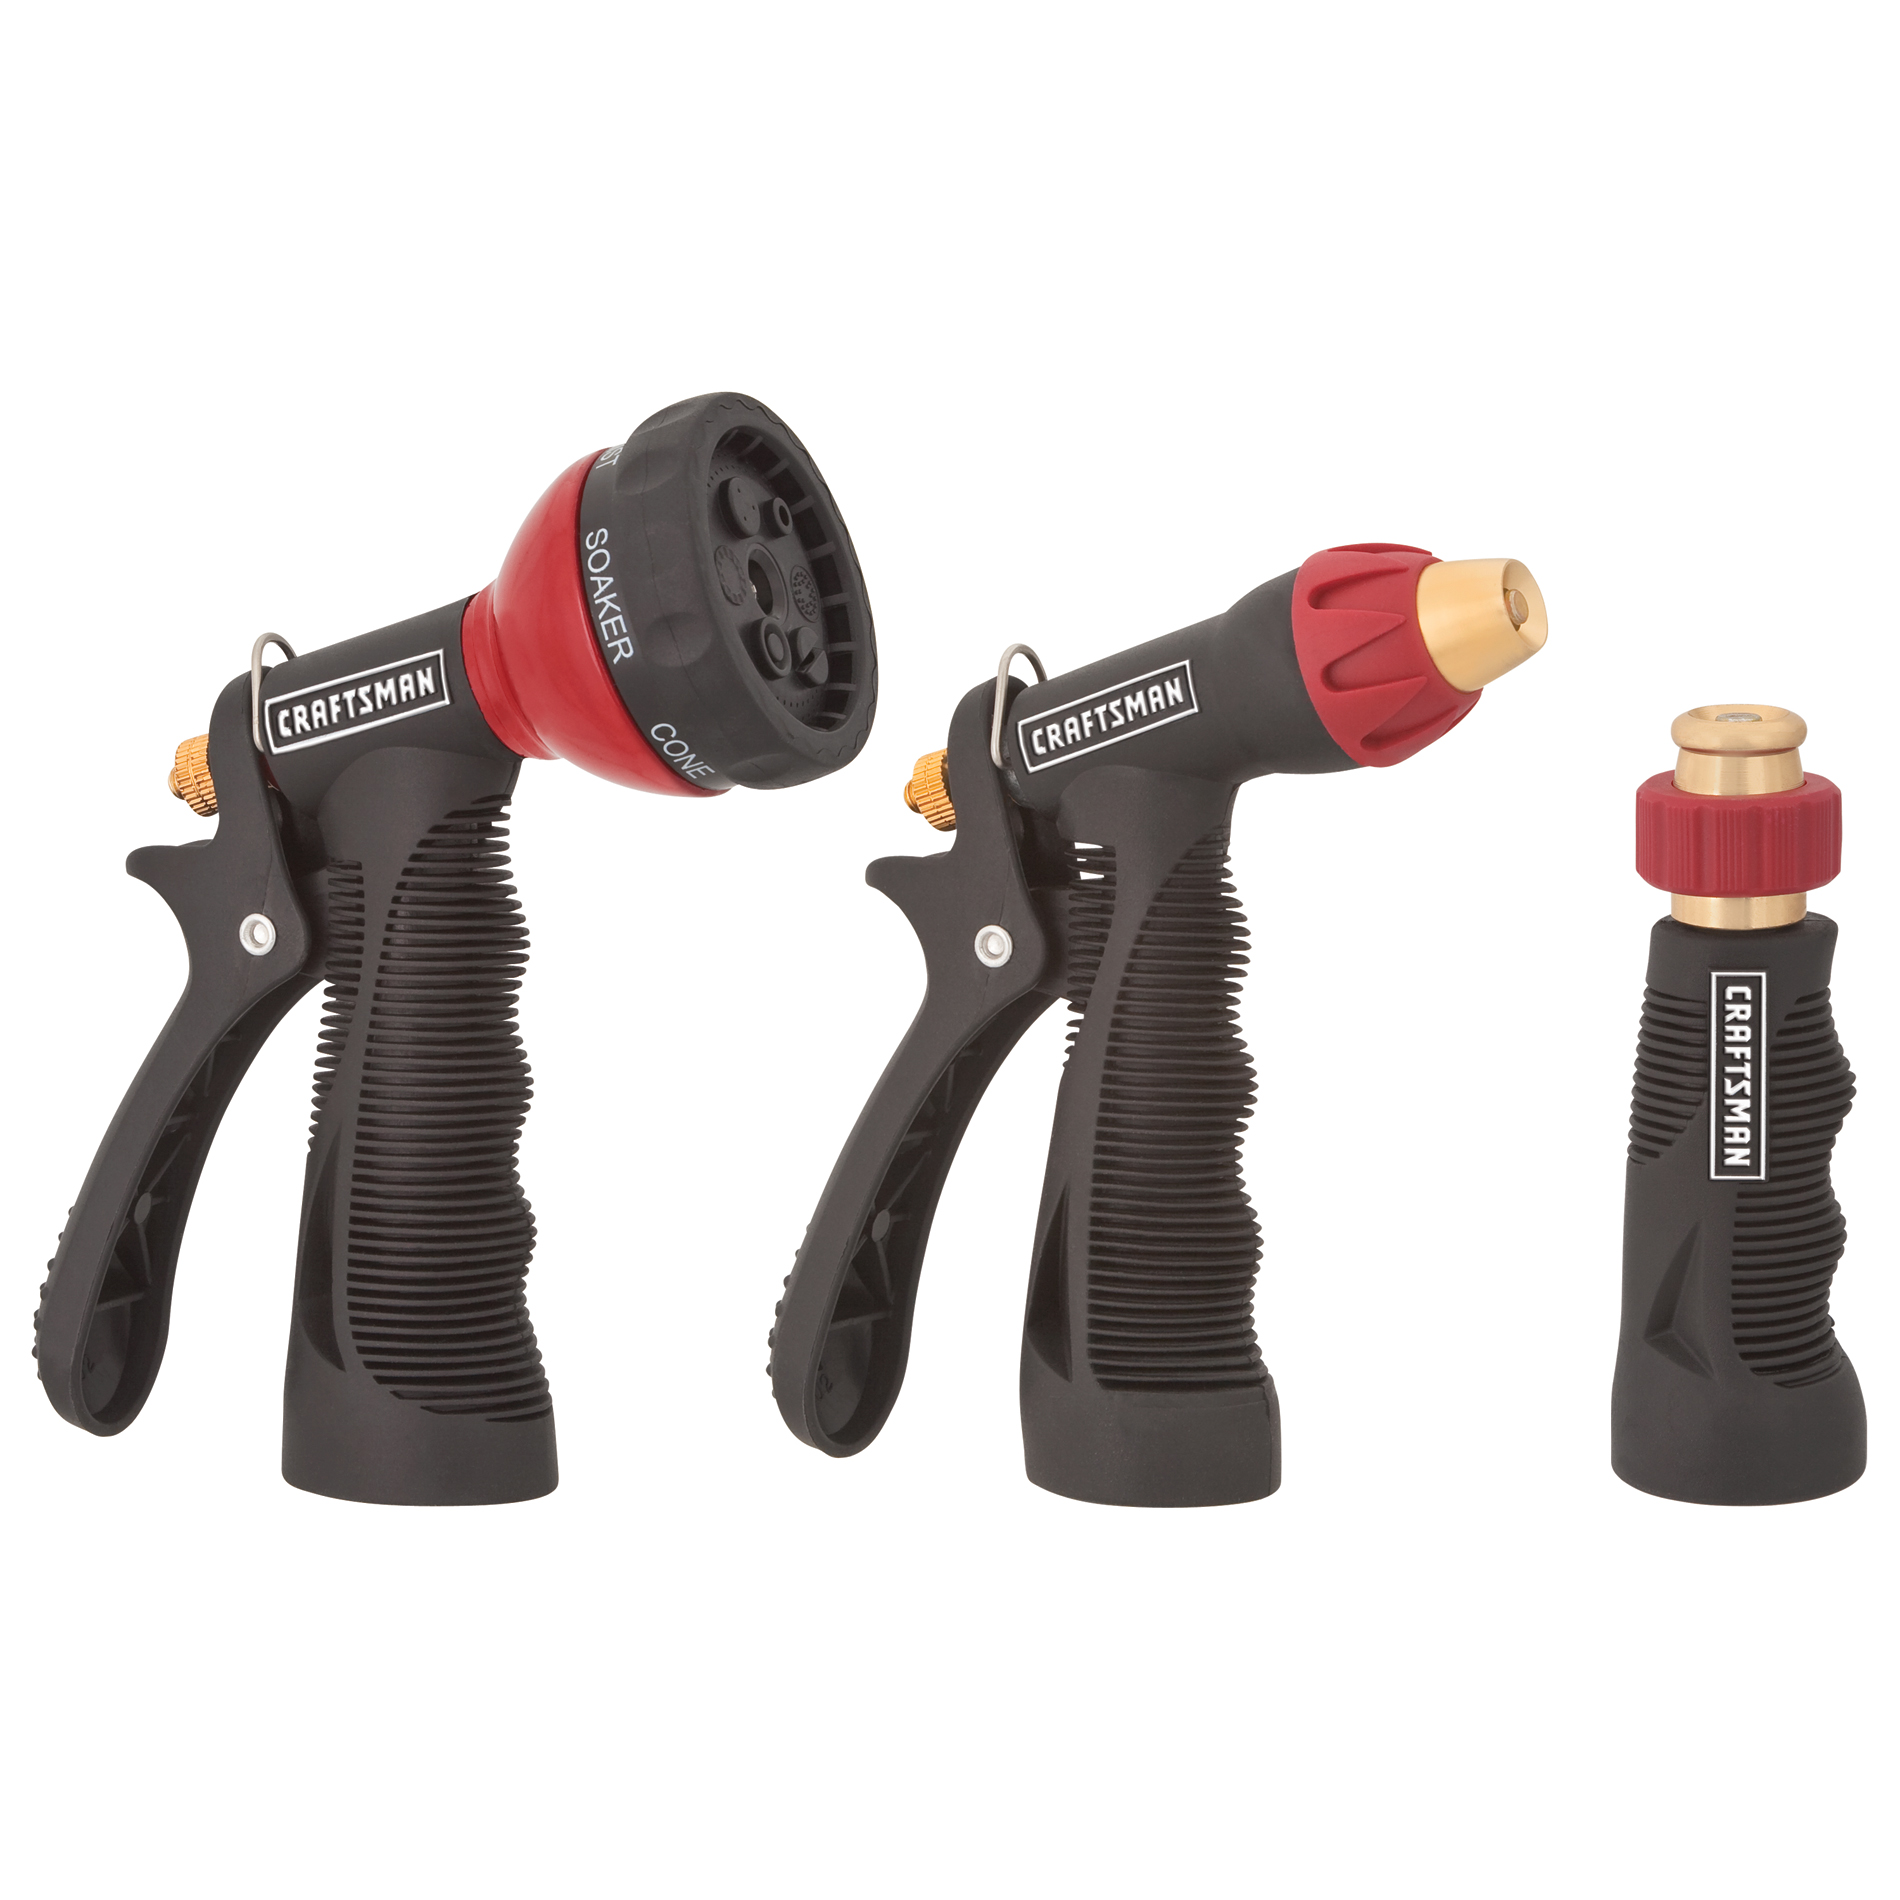 Craftsman 3 pc. Water Hose Metal Nozzle Set Only $8.99! (44% Off)